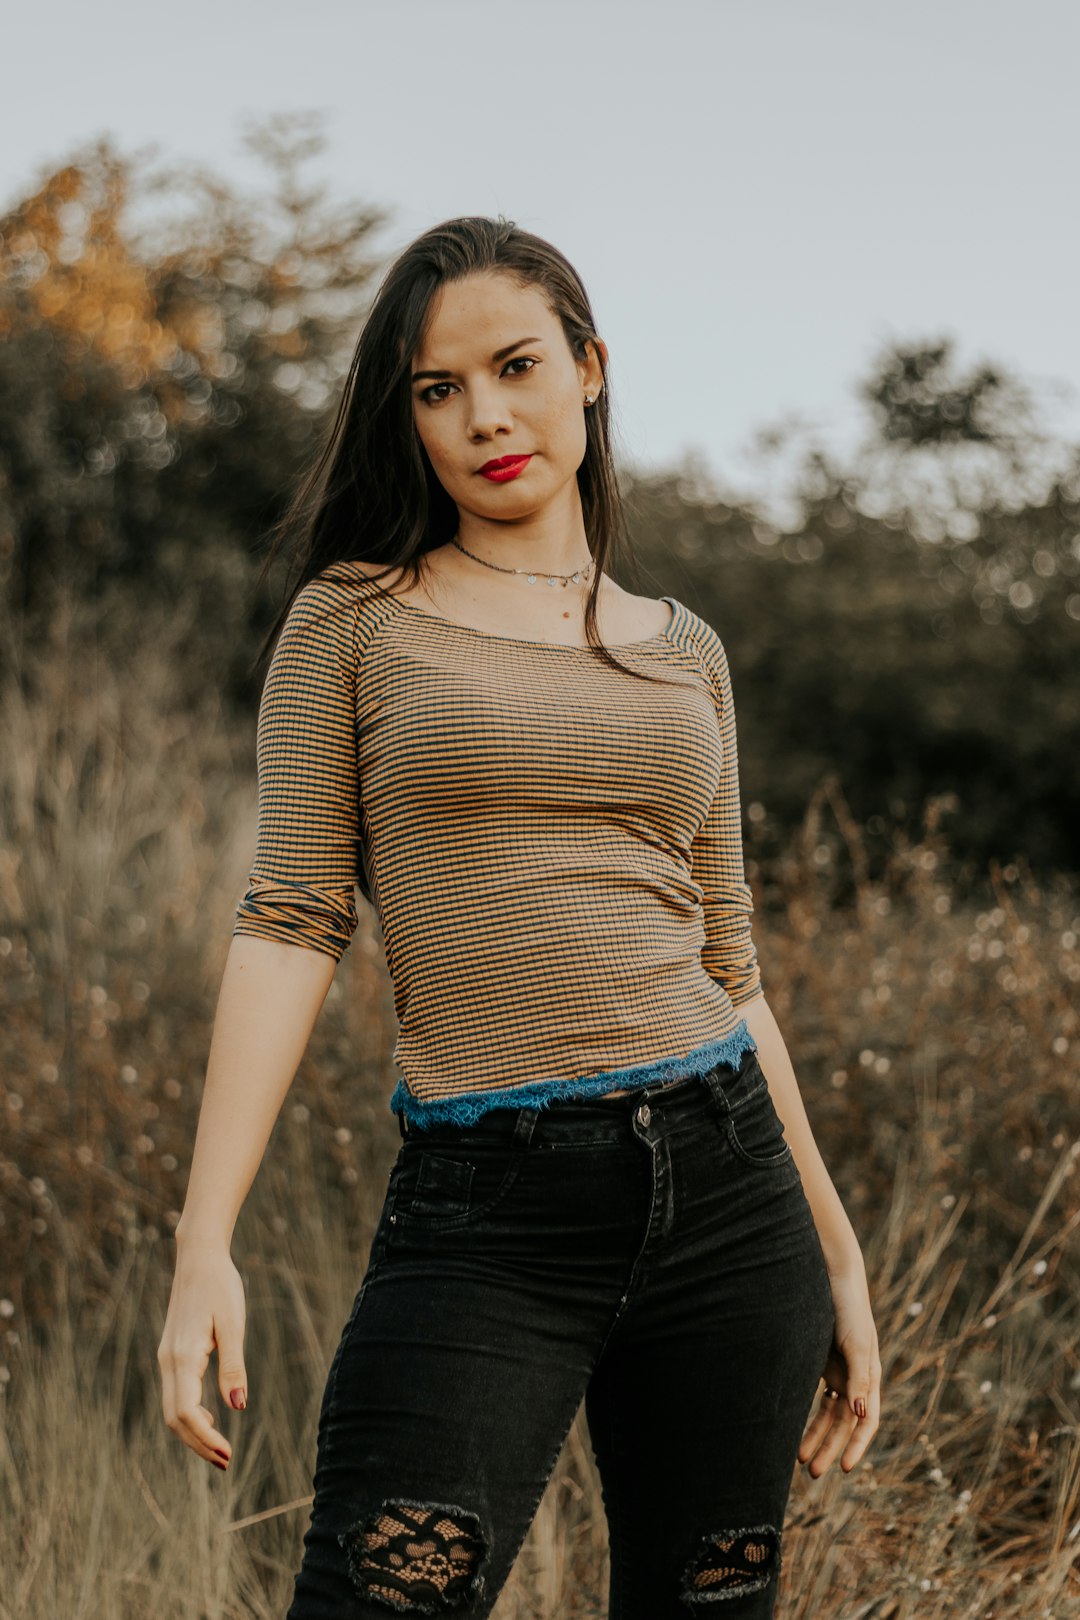 woman in brown long sleeve shirt and black denim jeans standing on grass field during daytime